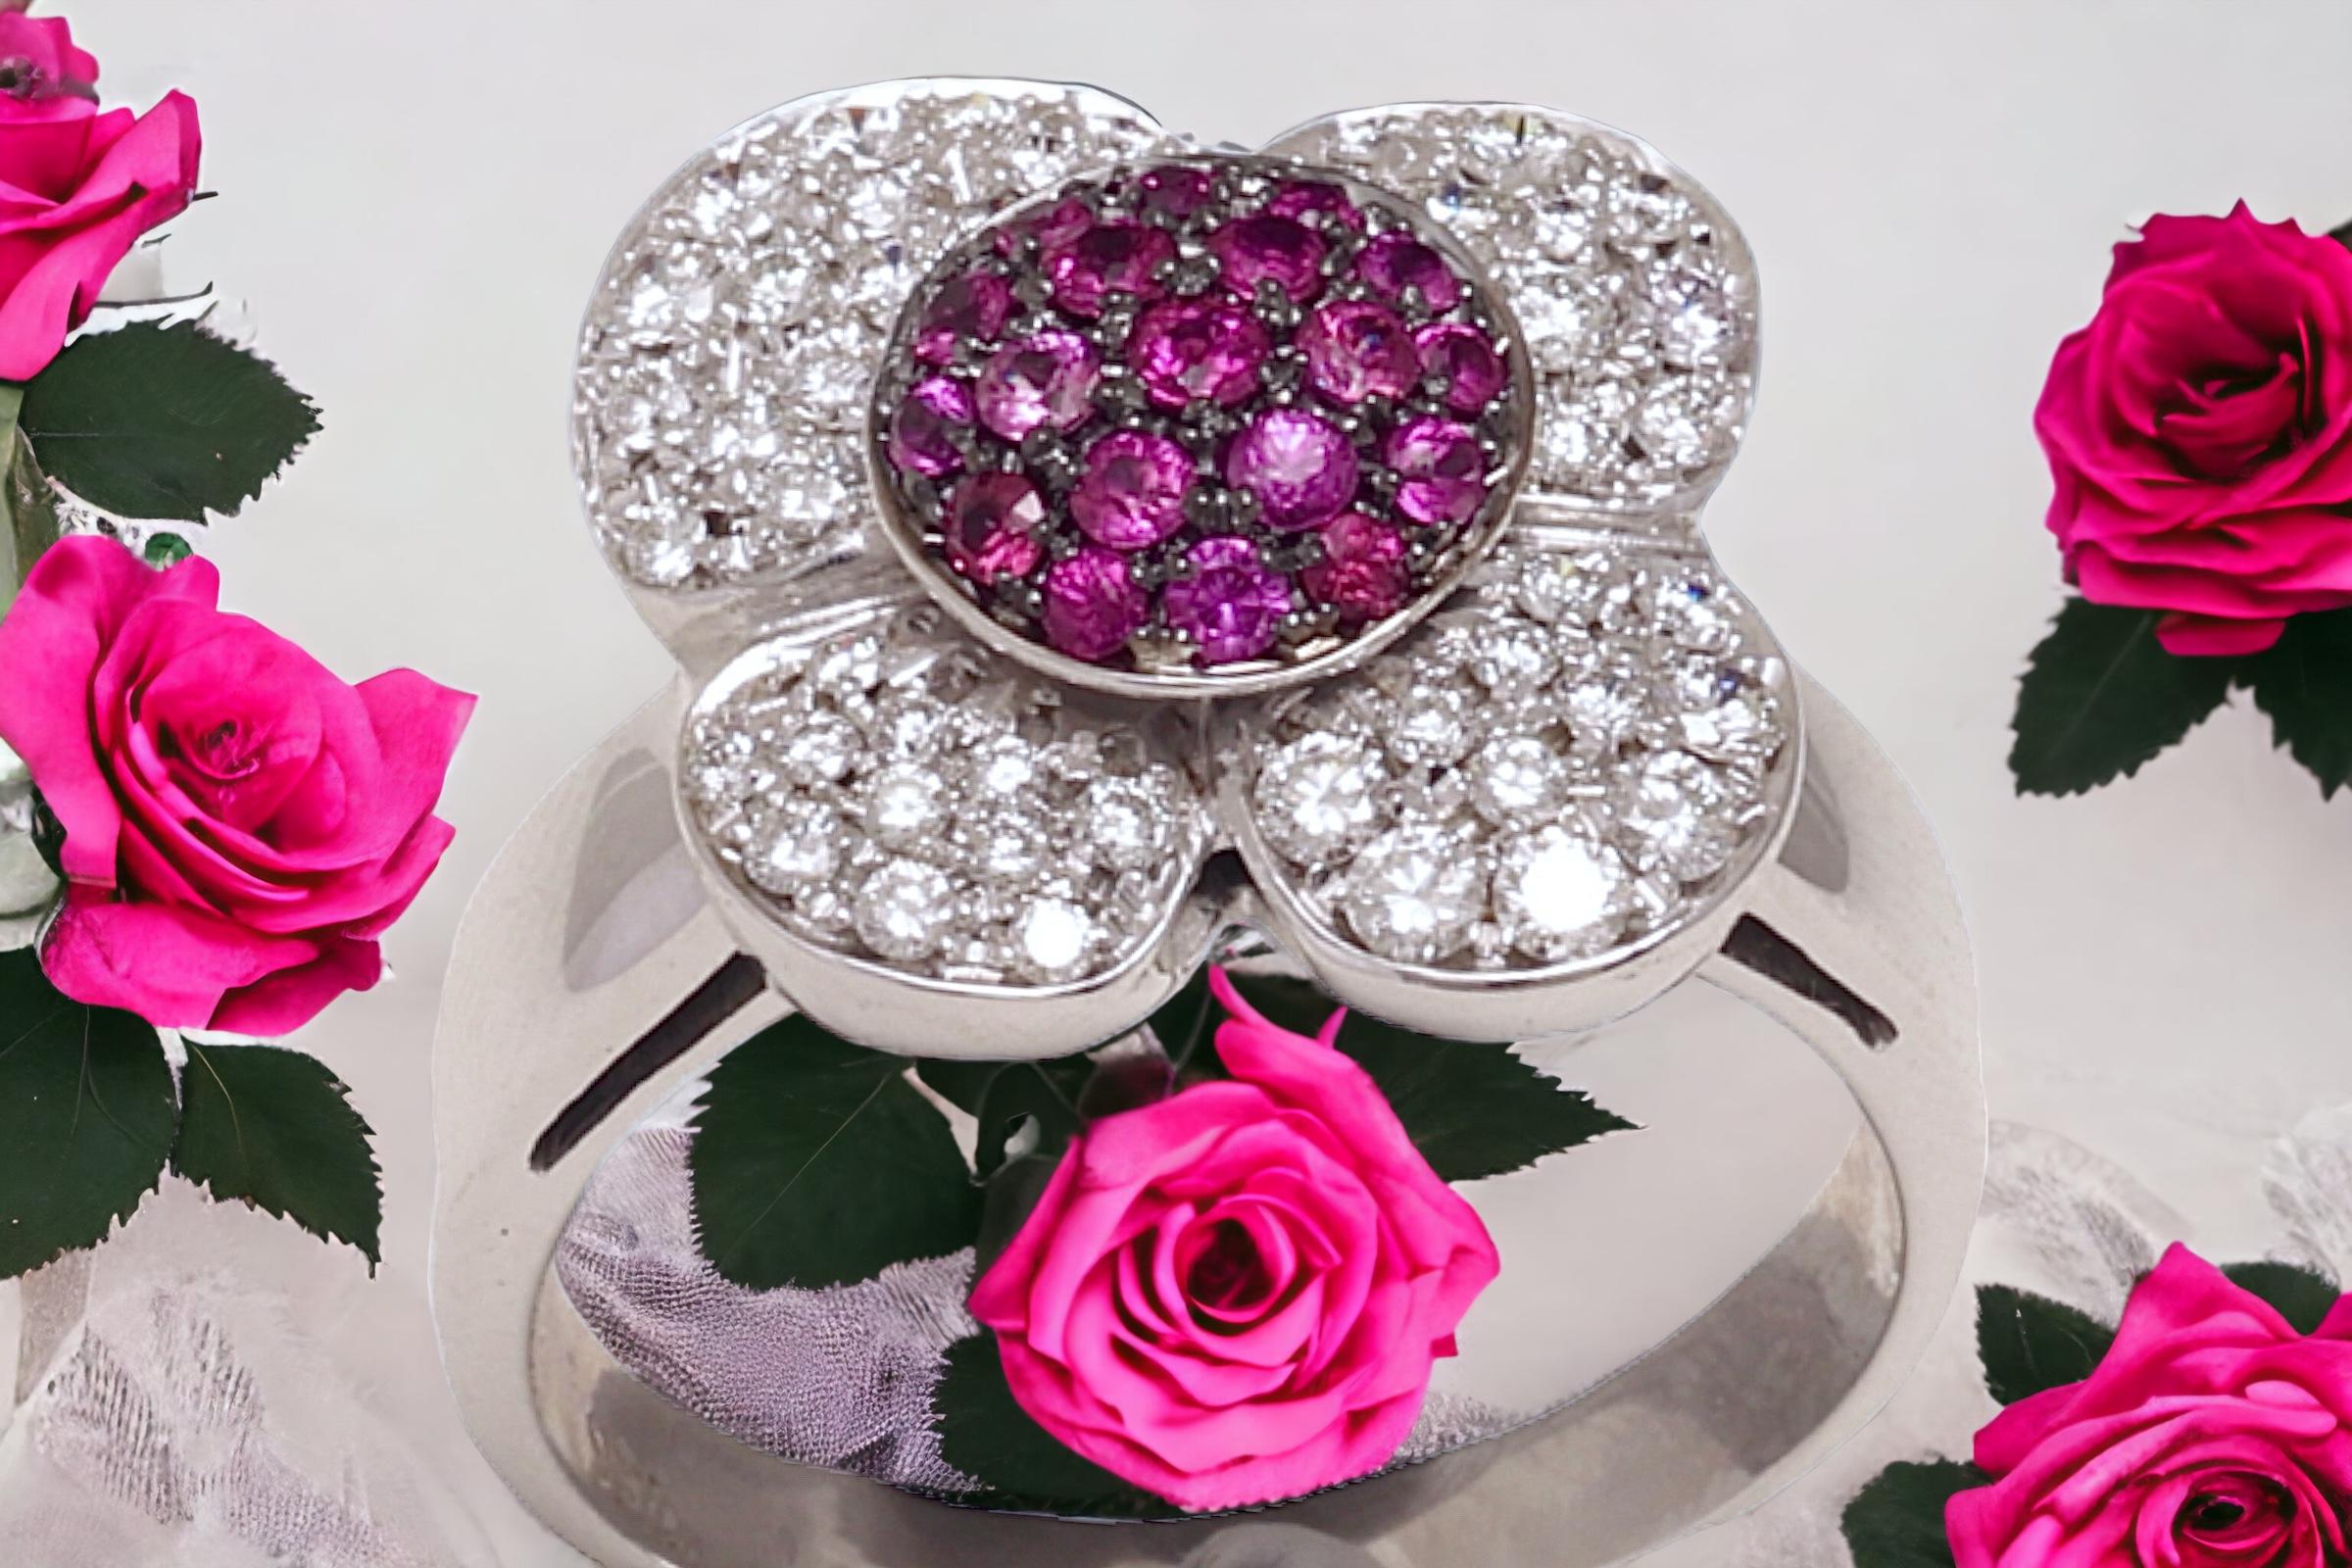  18 kt. White Gold Flower Shape Ring with 1 ct. Diamonds & 0.5 ct. Pink Sapphire For Sale 5